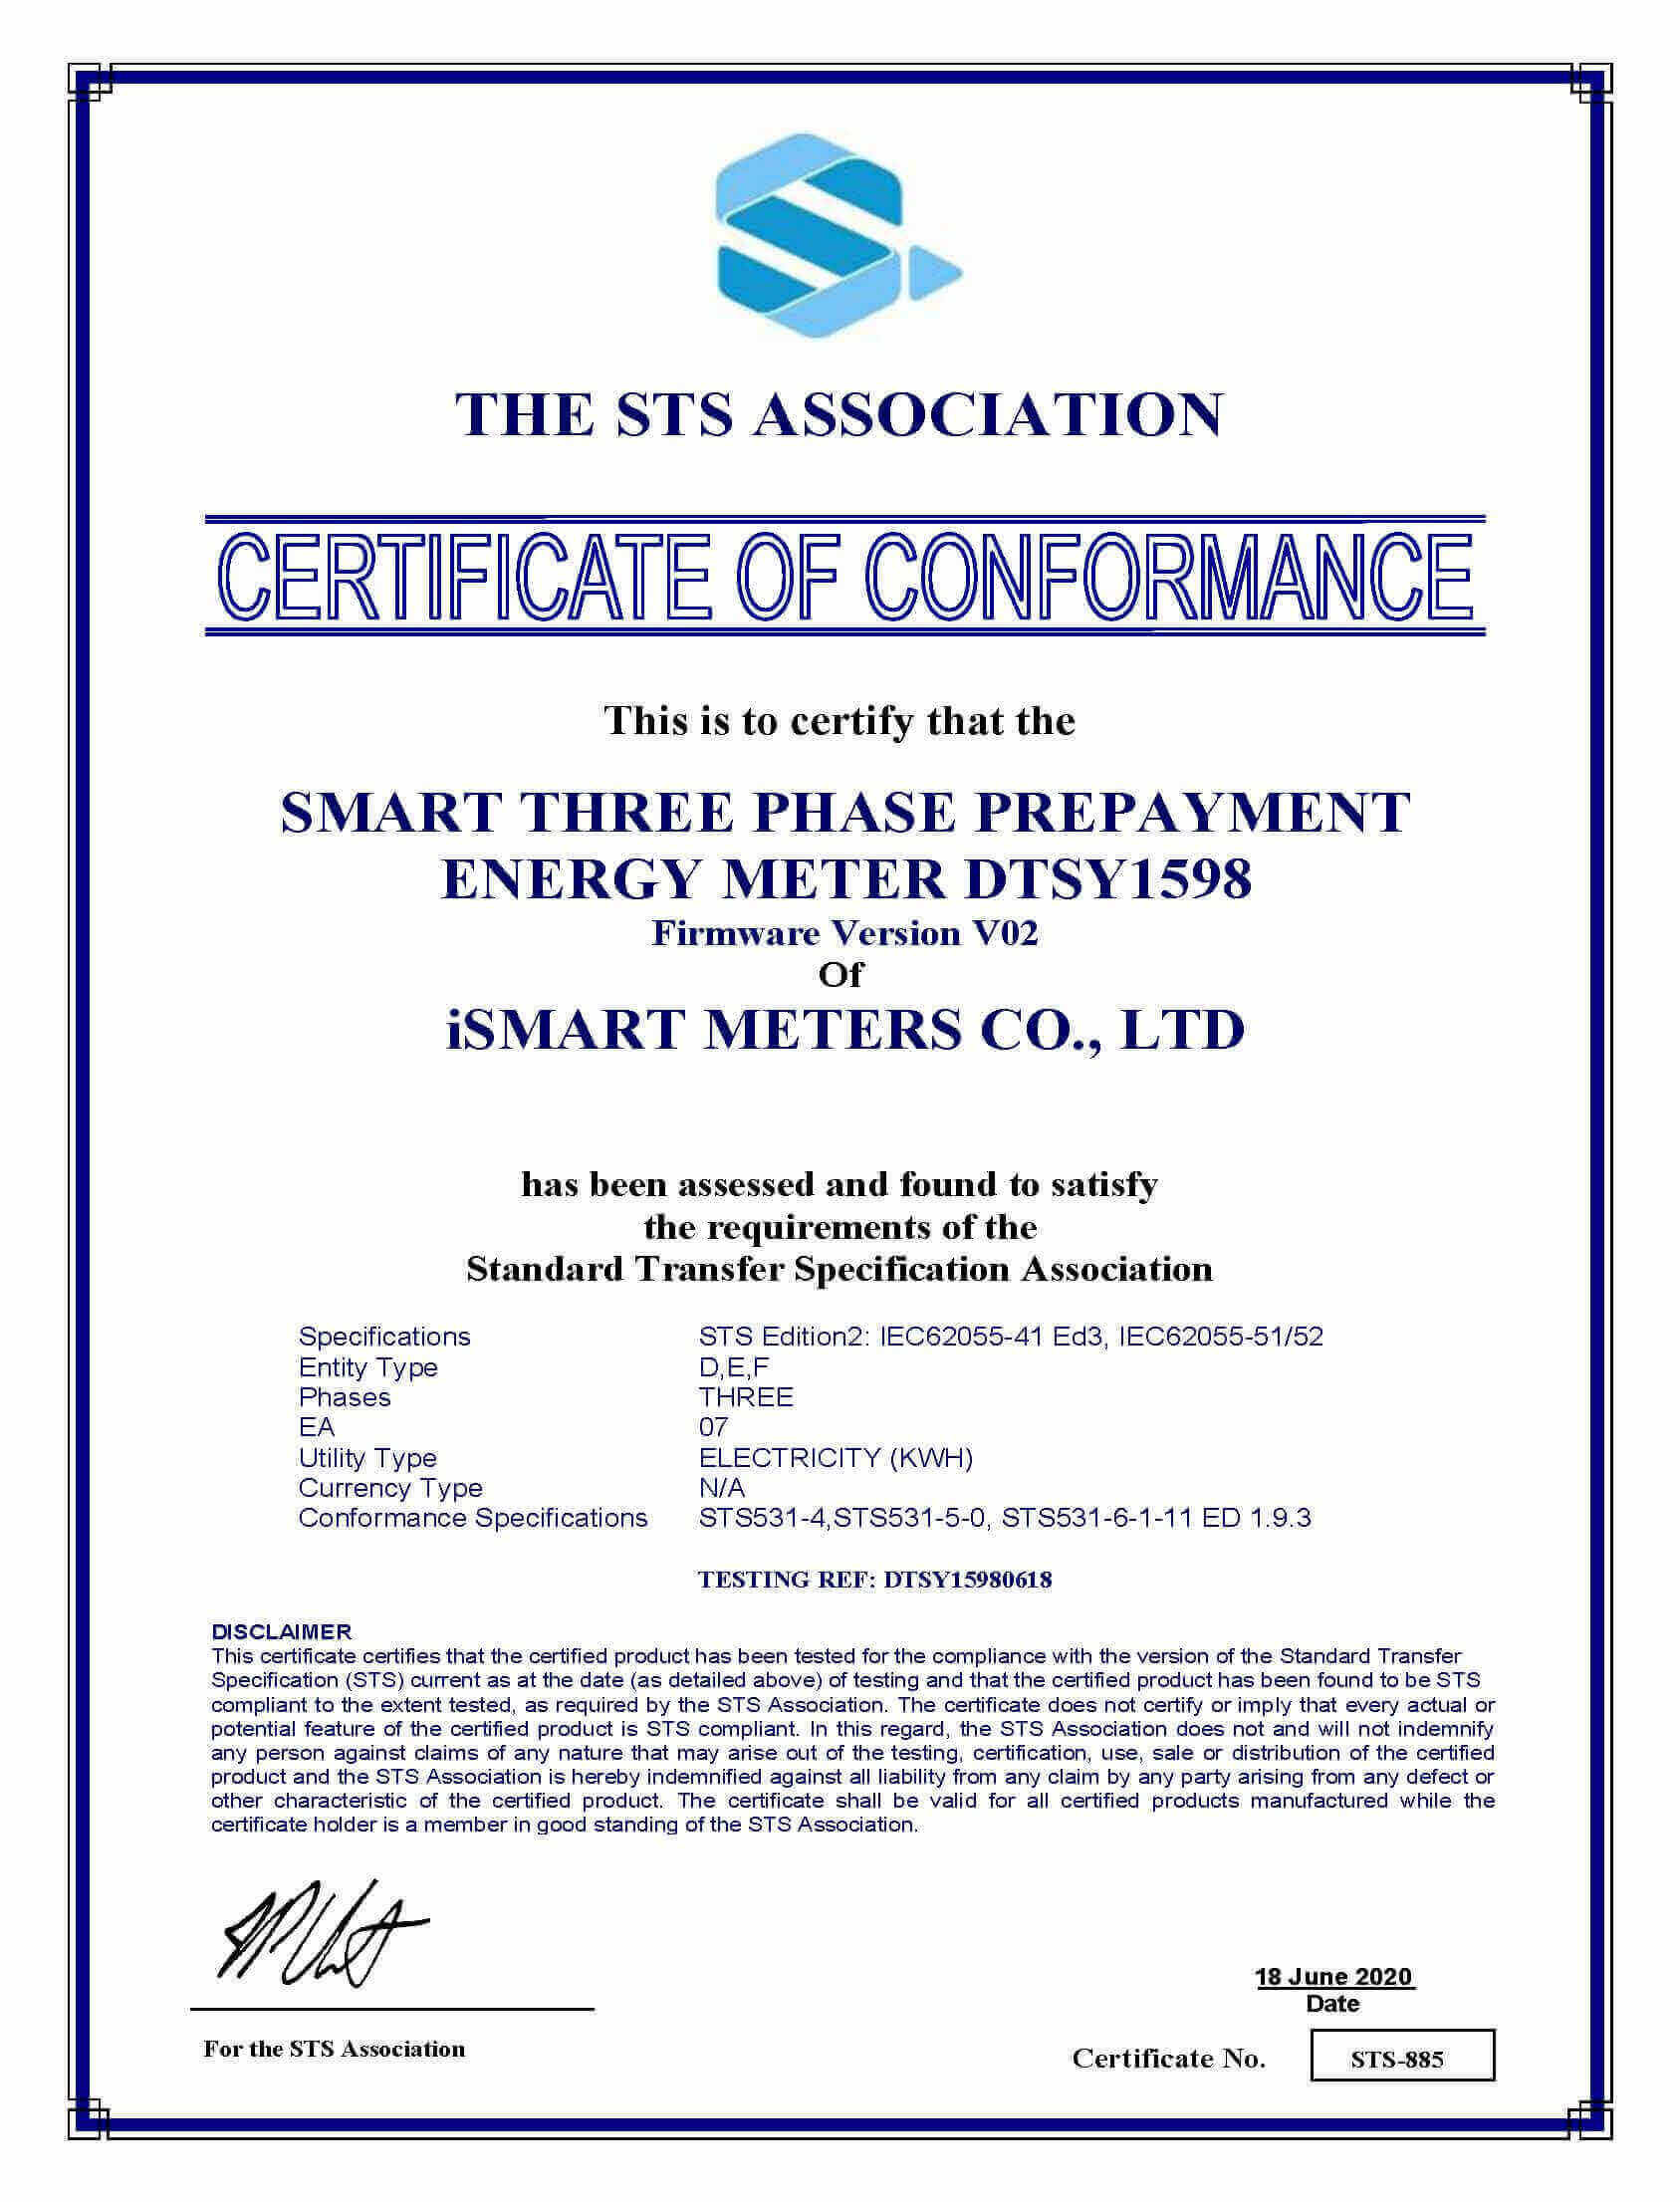 ISMART THREE PHASE METER STS CERTIFICATE FOR DTSY1598 